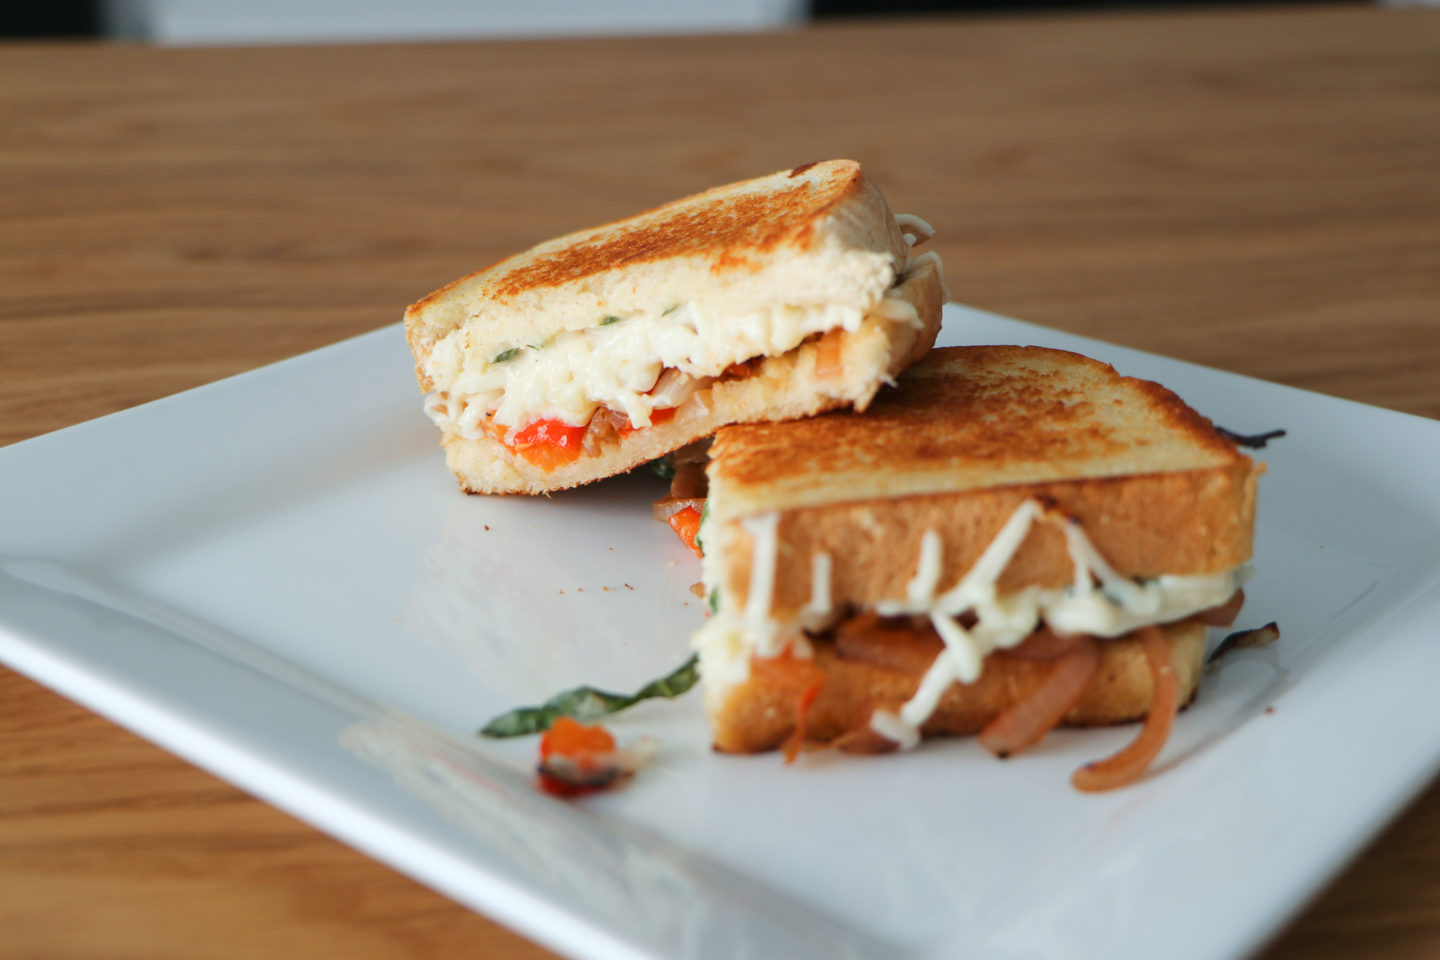 Grown-up grilled cheese